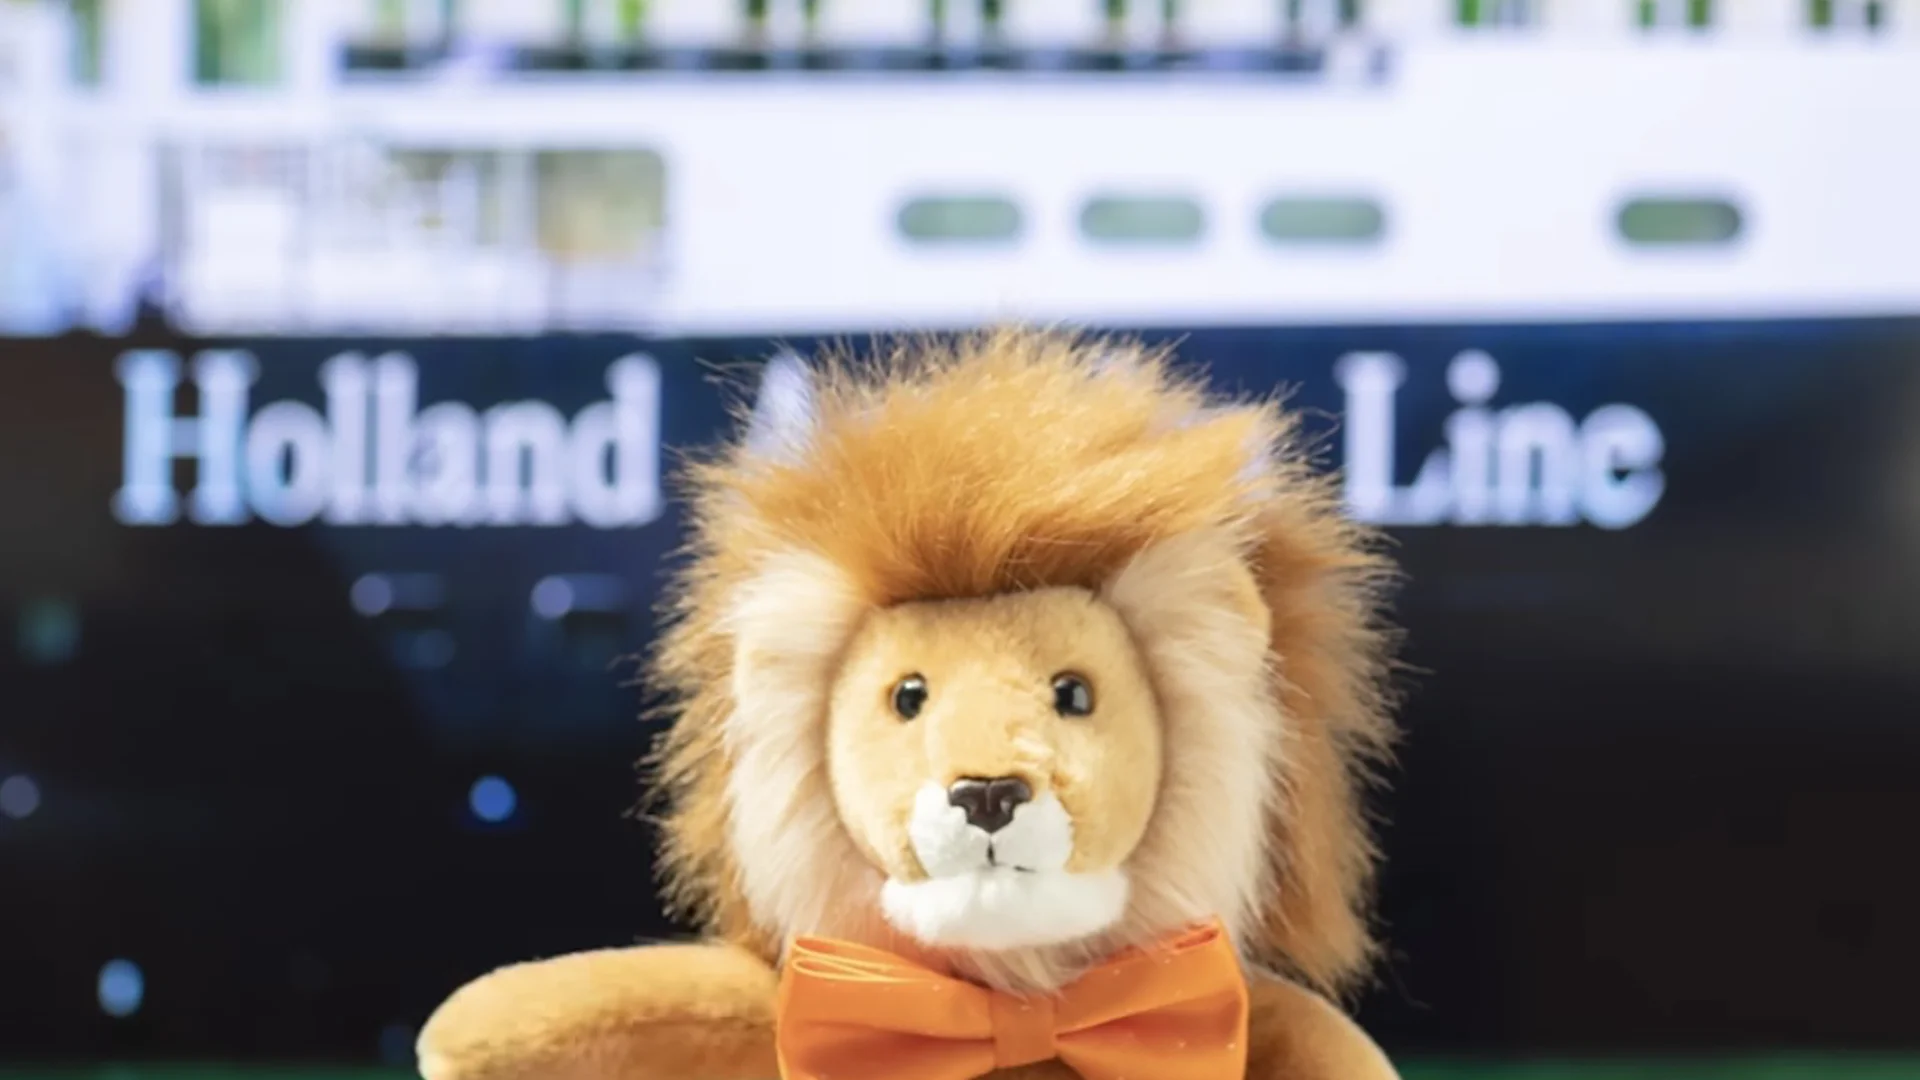 Holland America Line's lion mascot with orange bowtie in front of cruise ship.